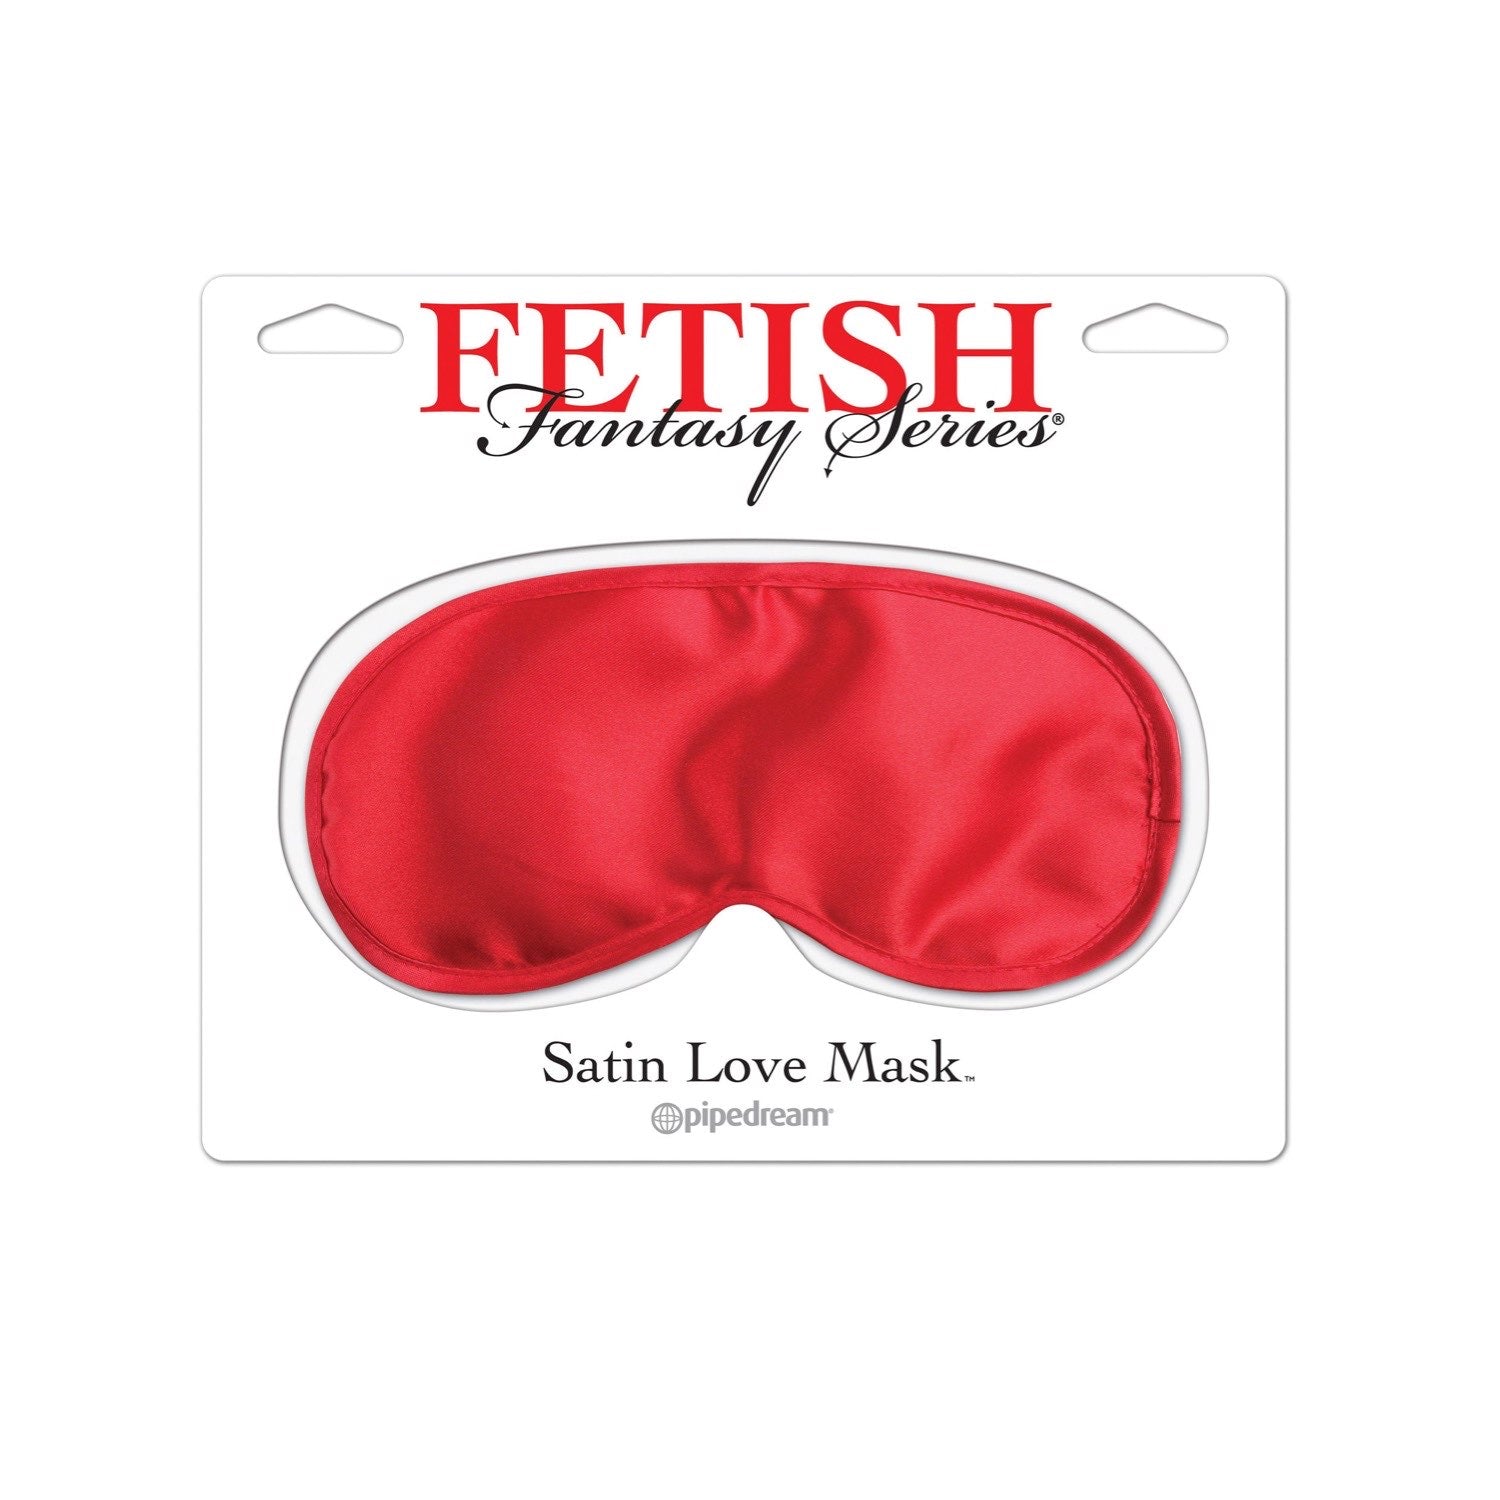 Fetish Fantasy Series Satin Love Mask - Red Eye Mask by Pipedream